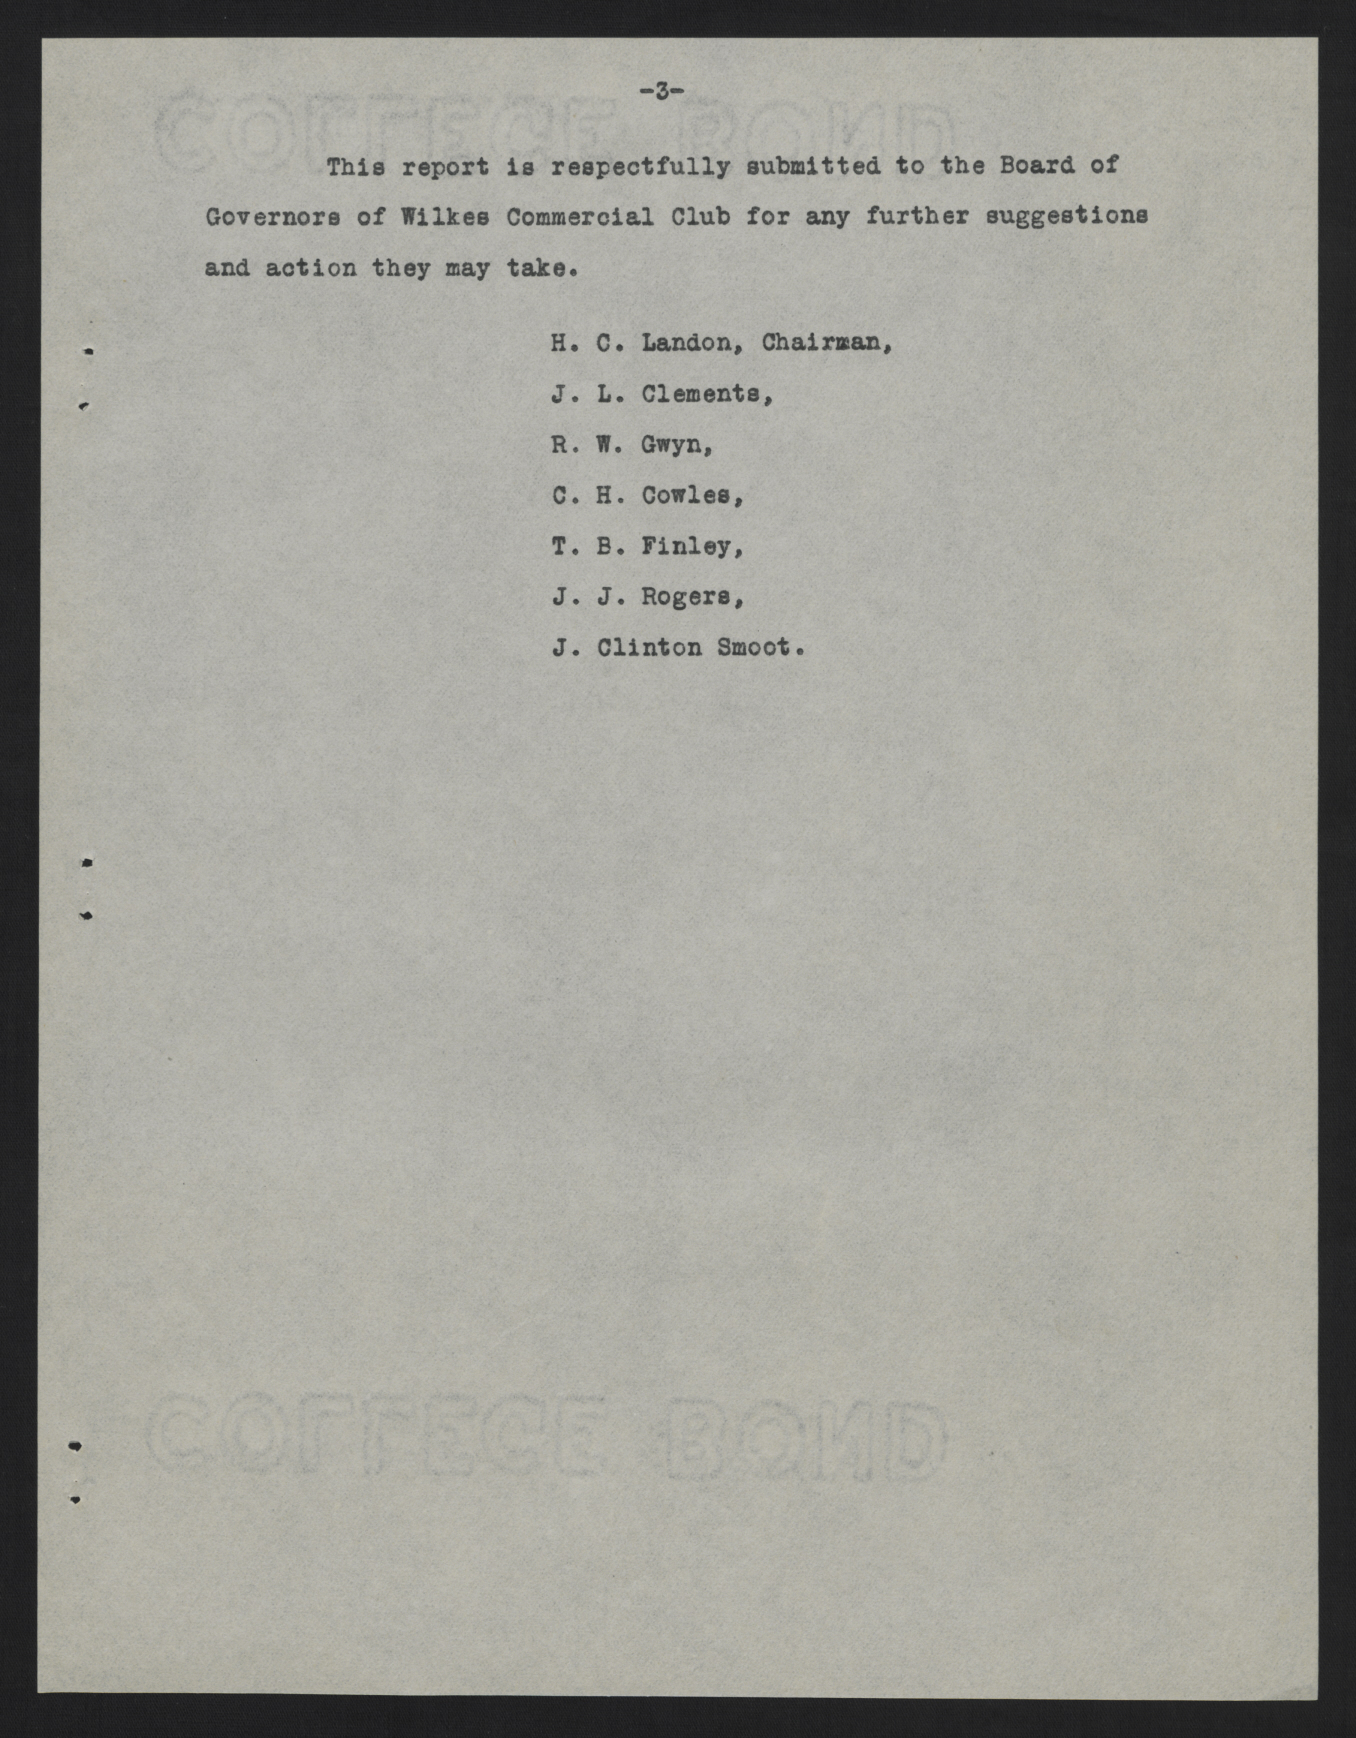 Report of the Wilkes Commercial Club Railroad Committee, 2 June 1916, page 4